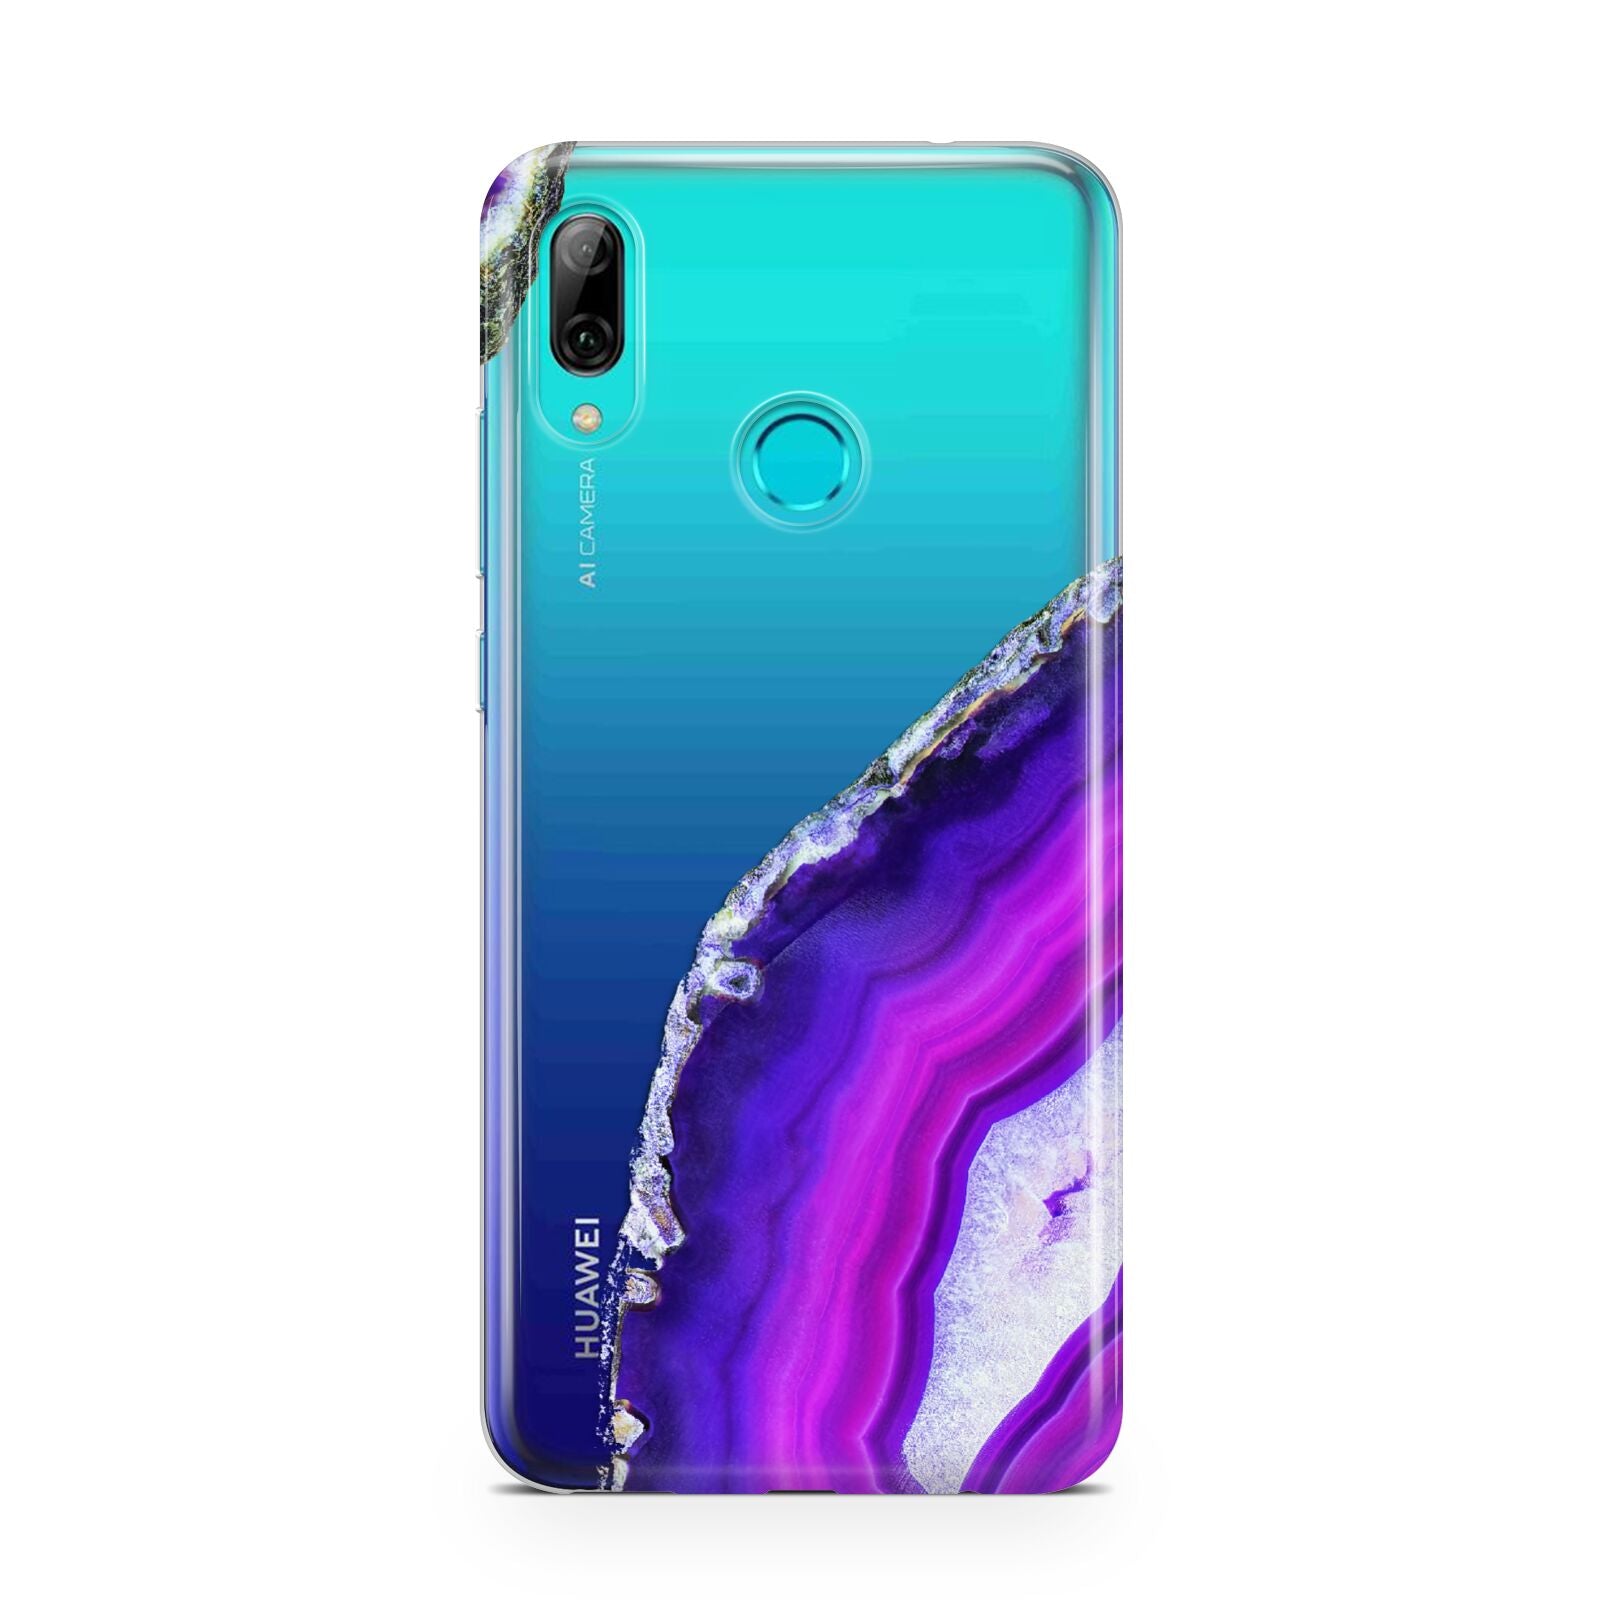 Agate Purple and Pink Huawei P Smart 2019 Case